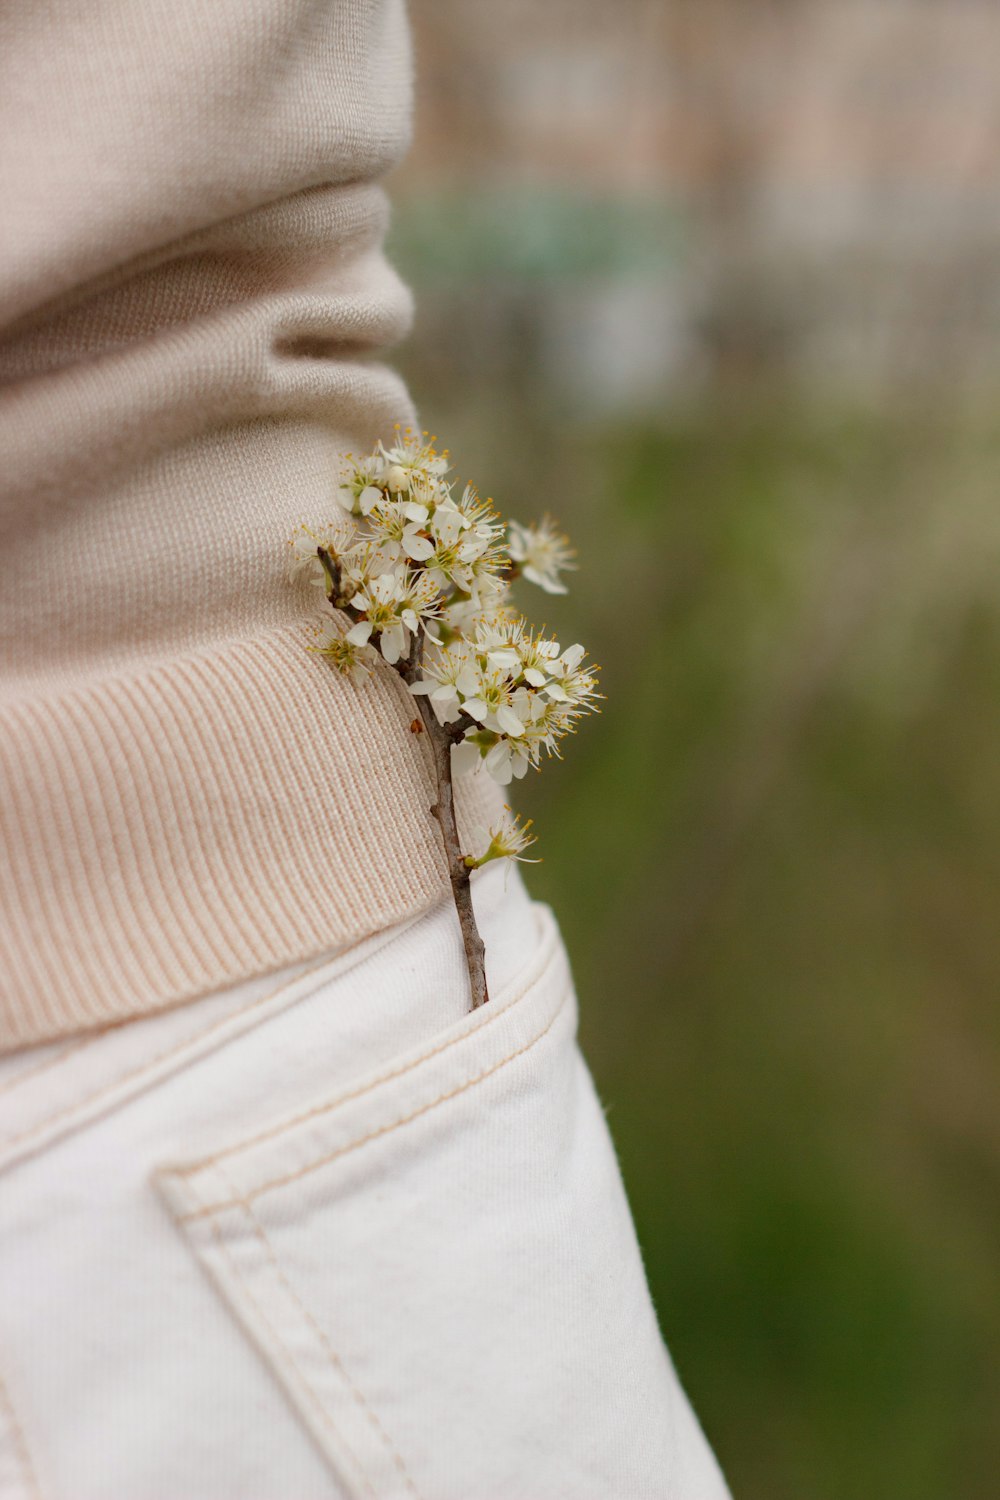 a small white flower sticking out of the pocket of someone's pants